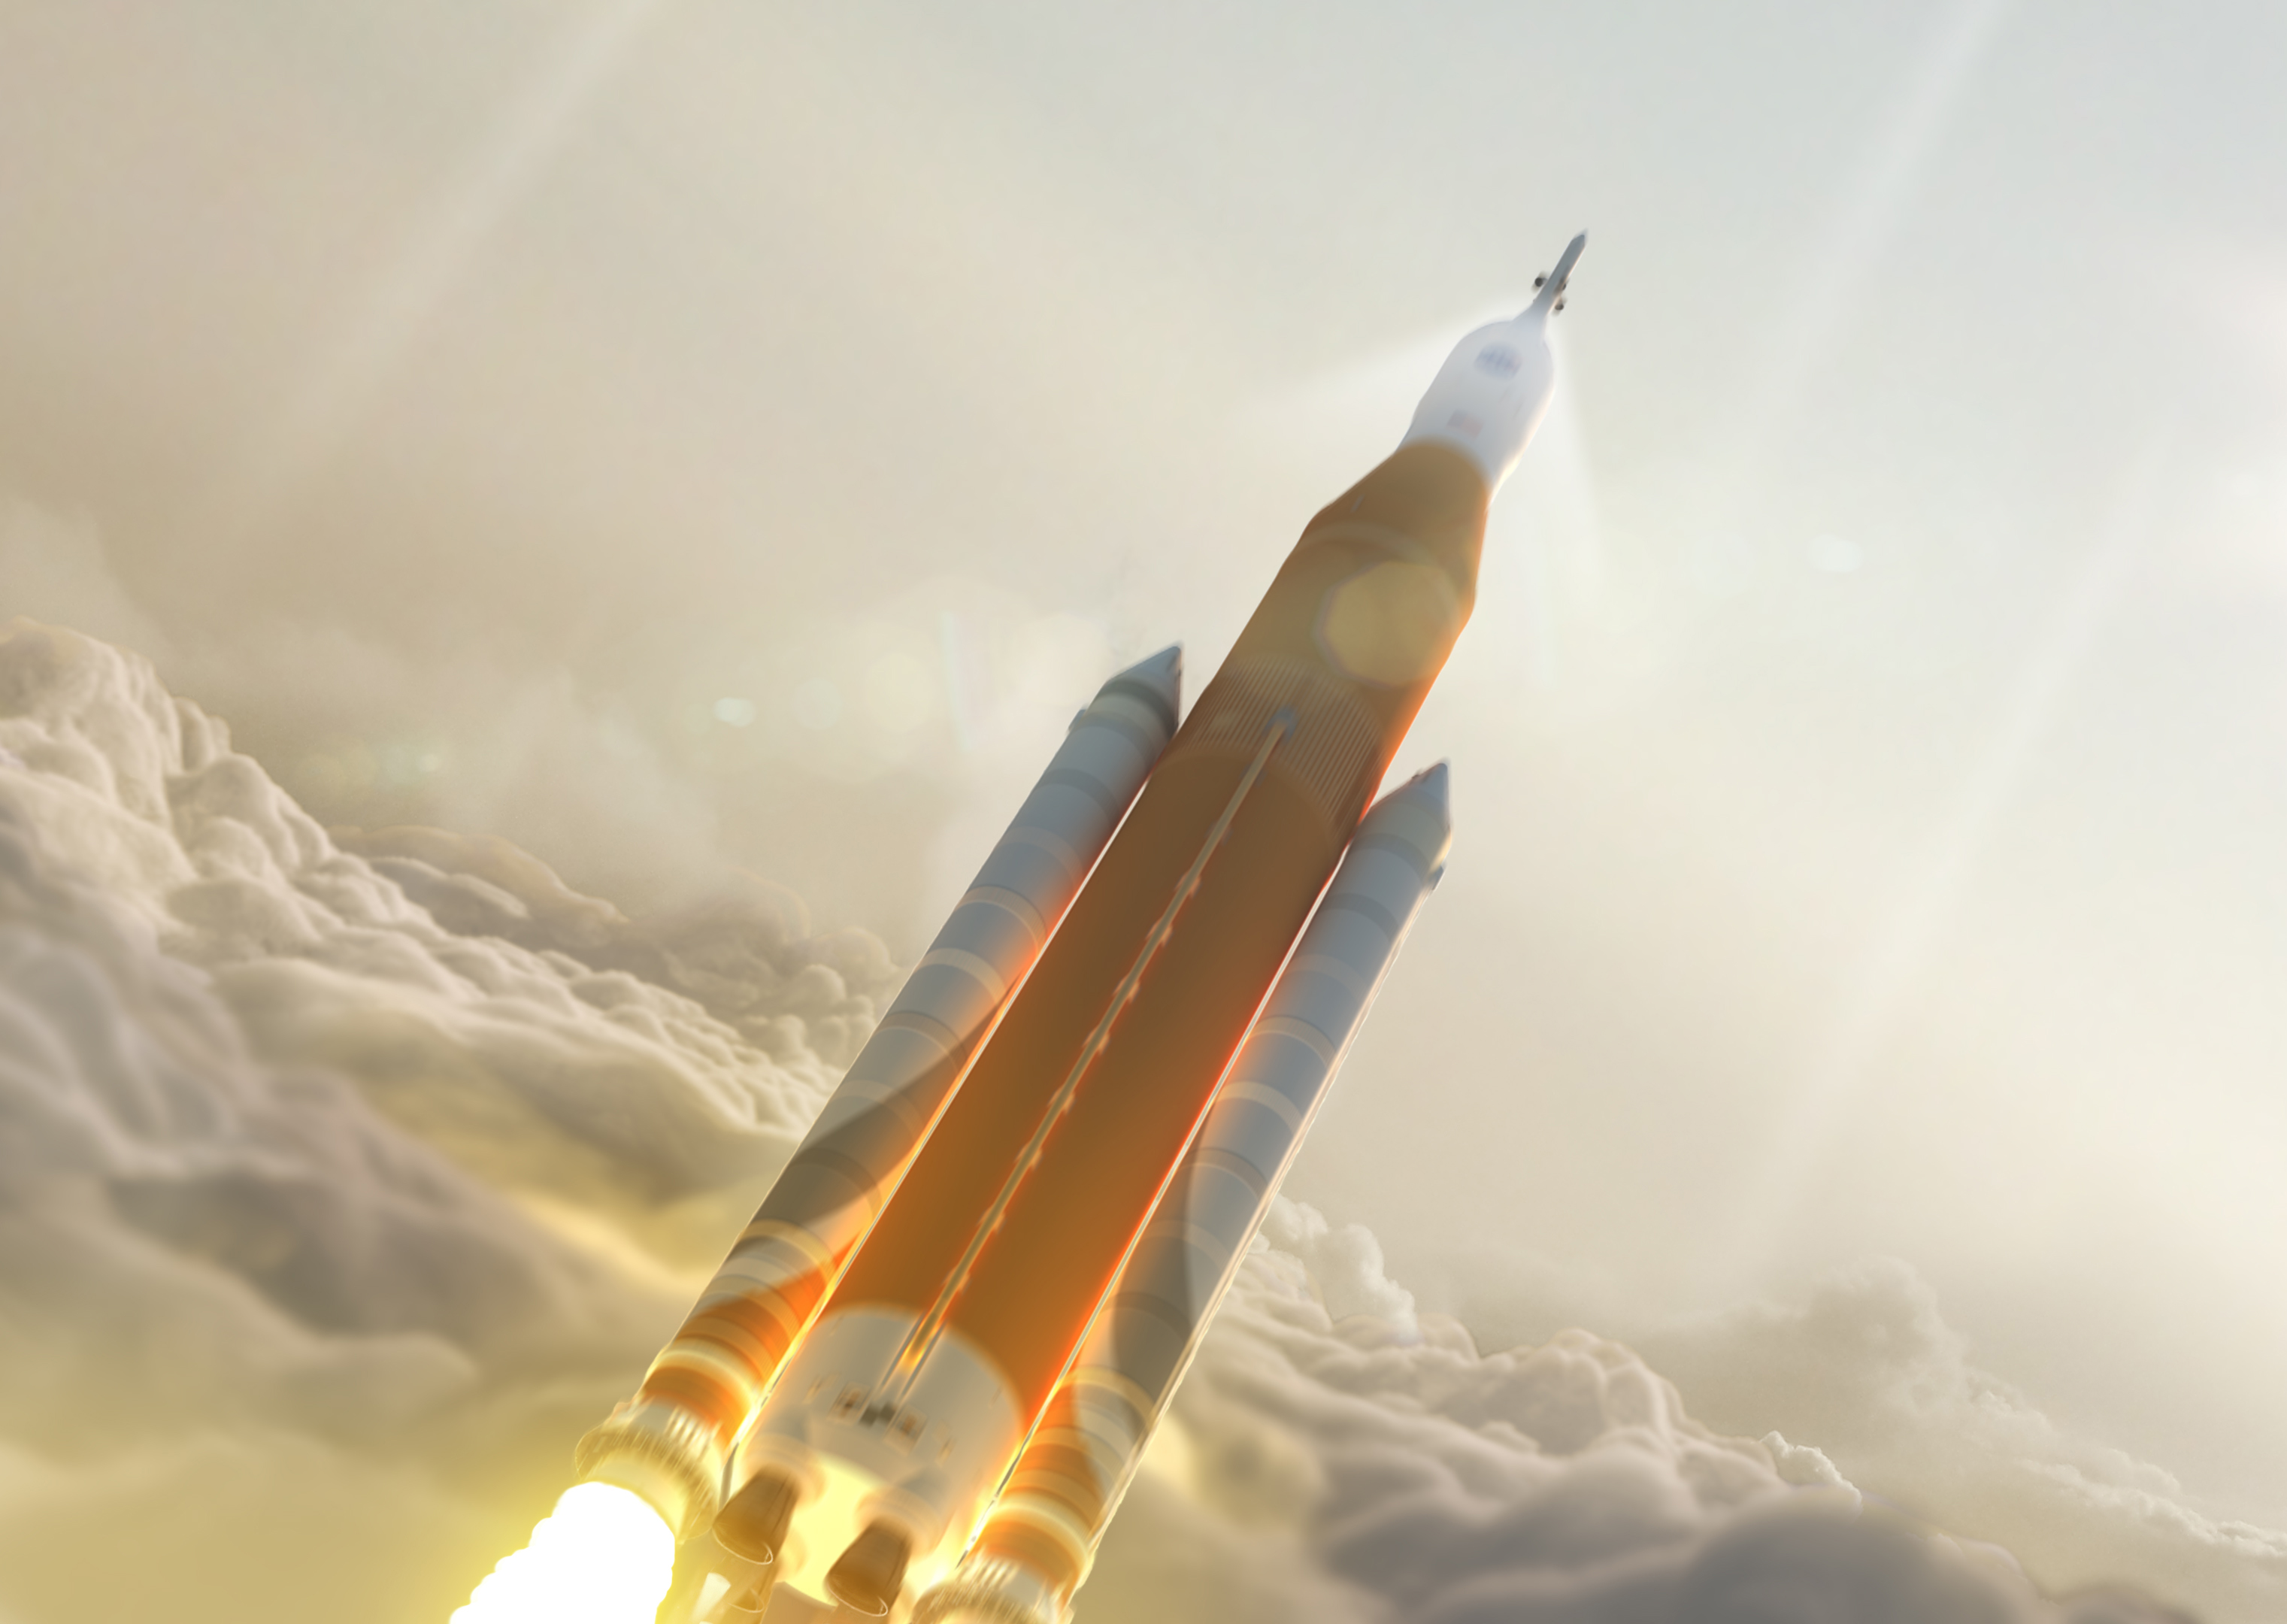 Boeing builds the most powerful rocket ever made